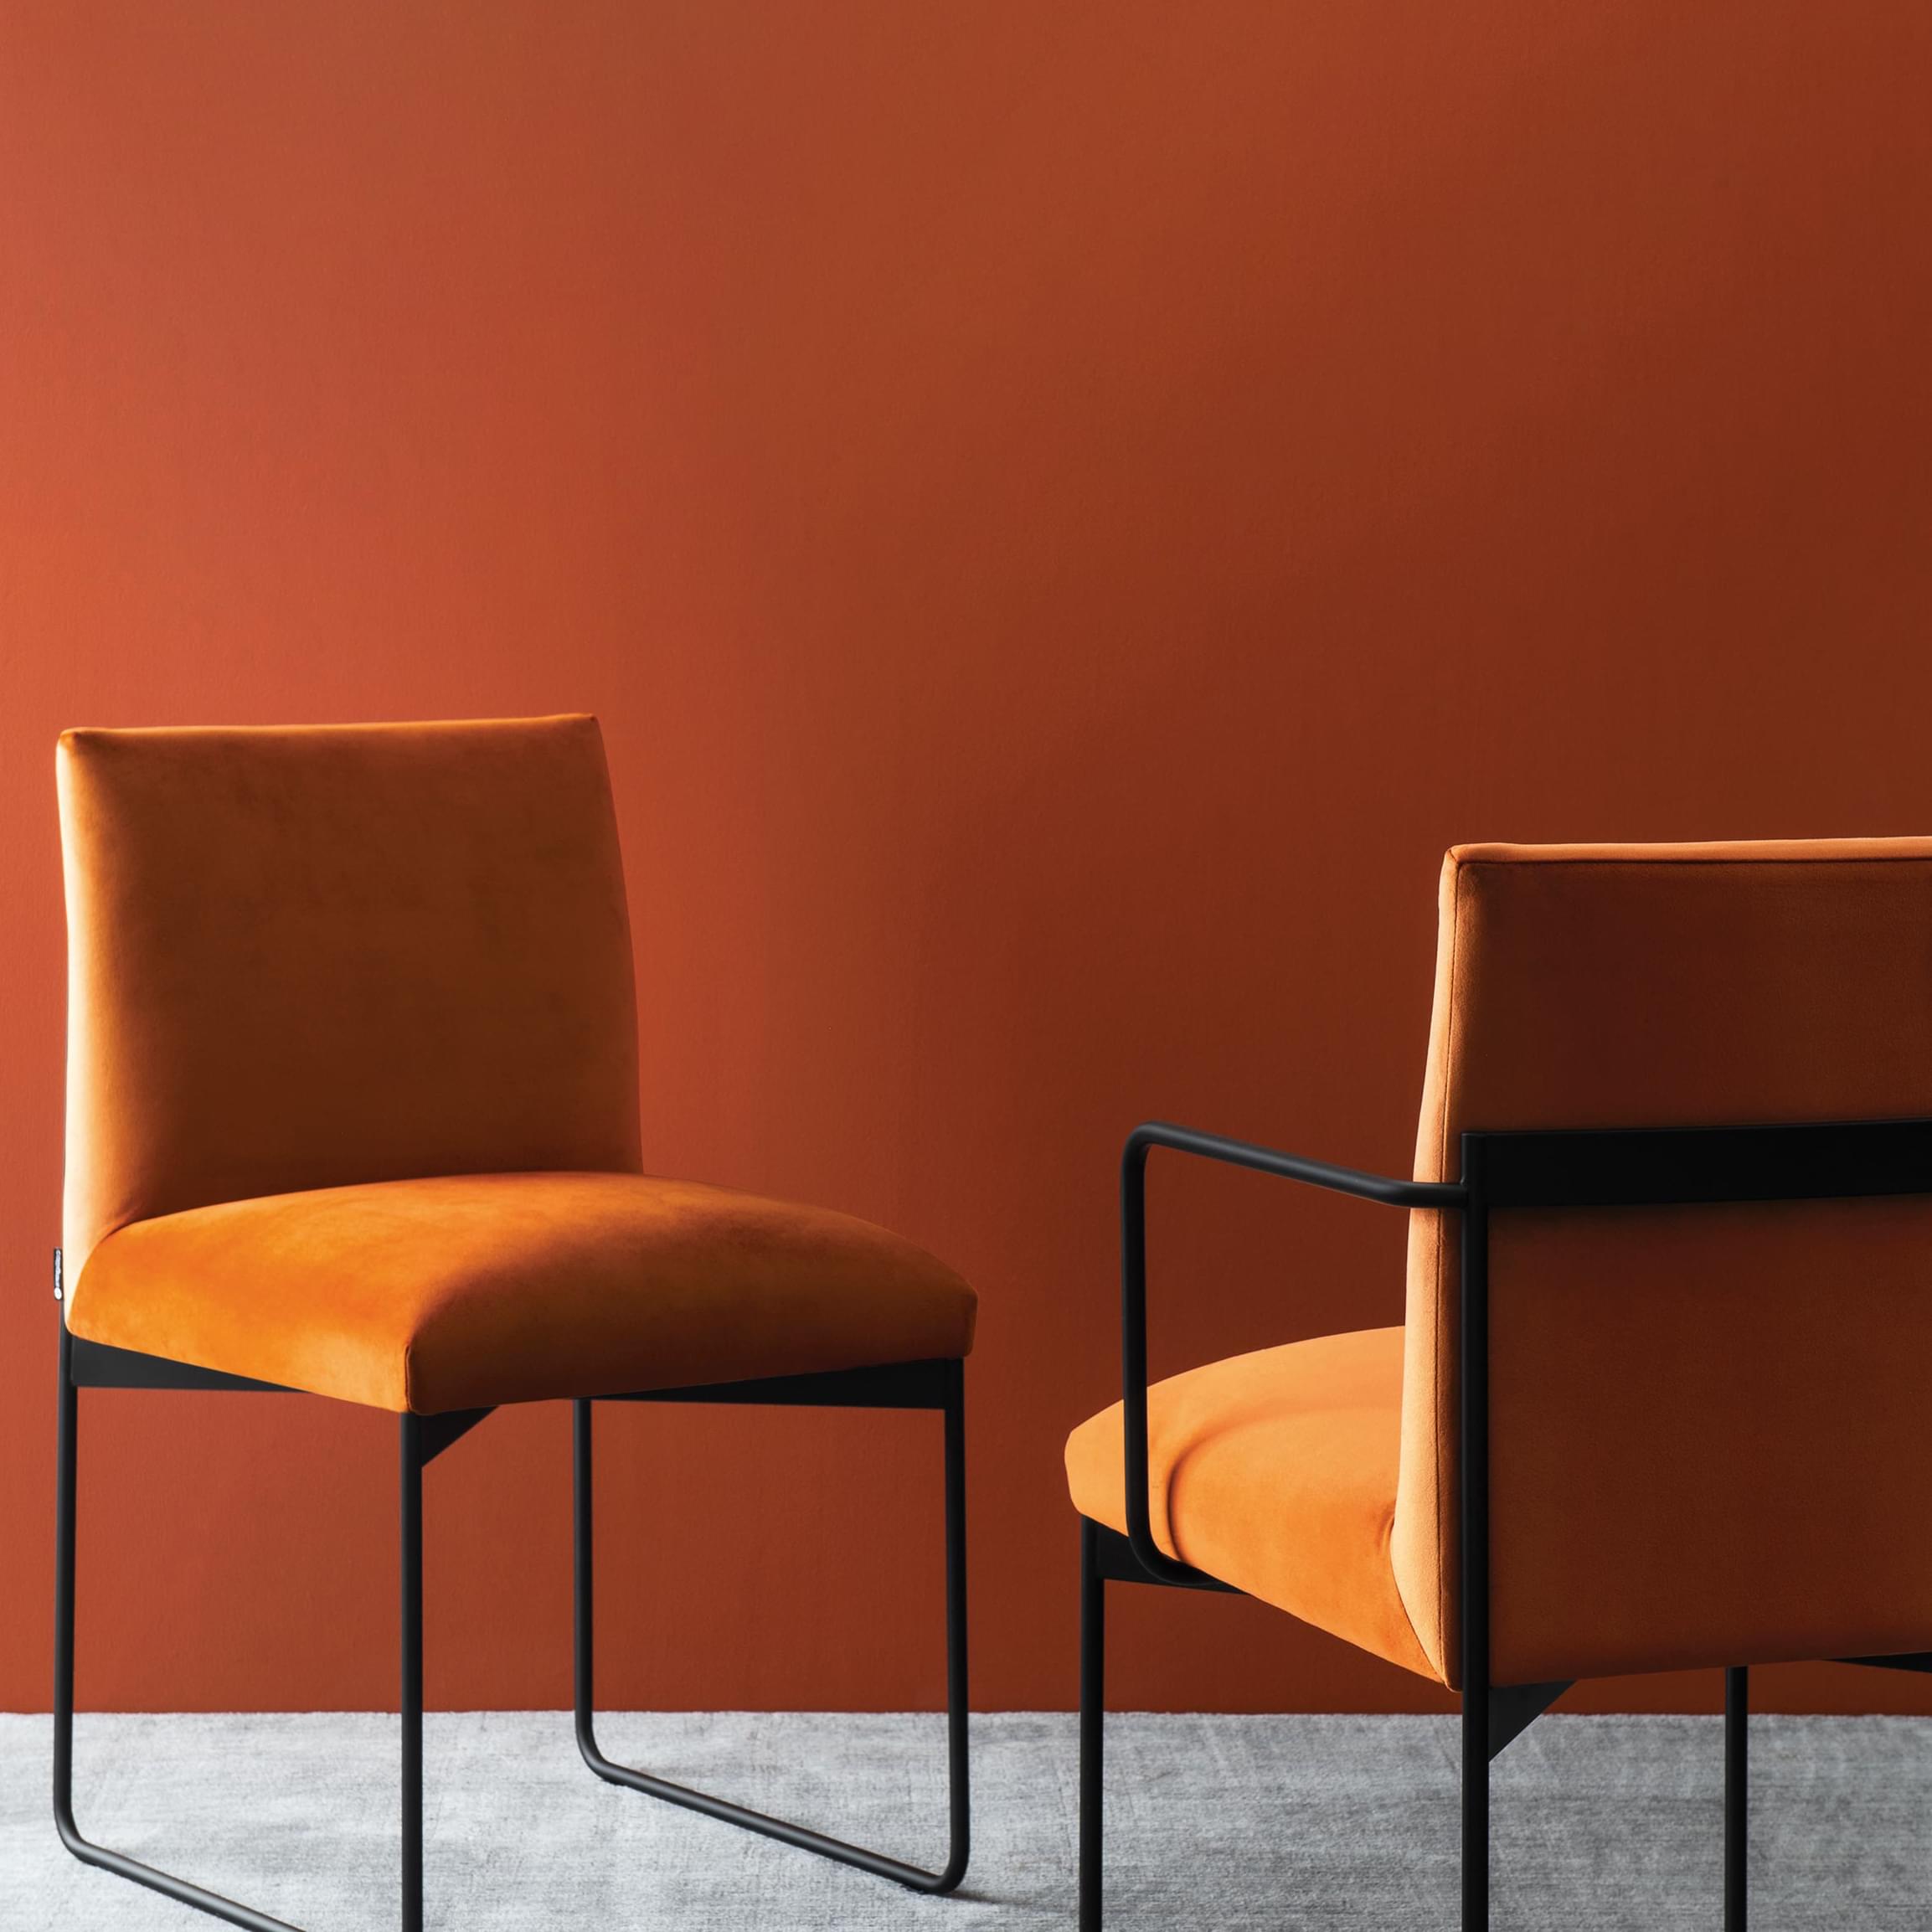 The Gala collection in orange upholstery